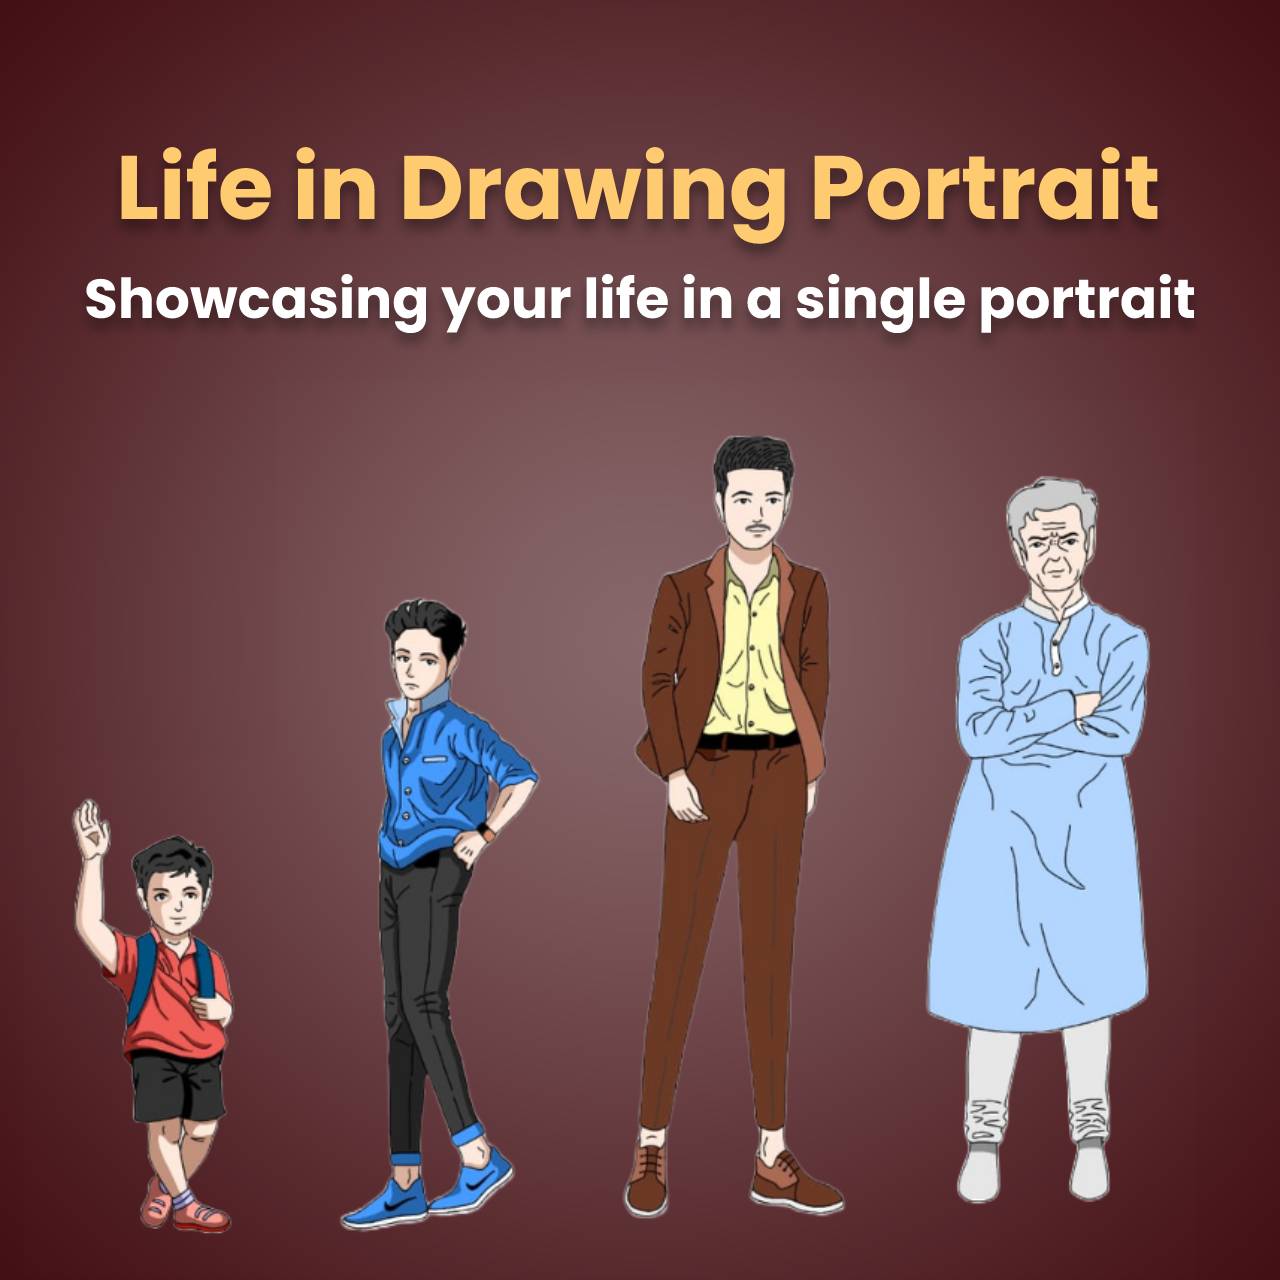 Life in Drawing Portrait Biography